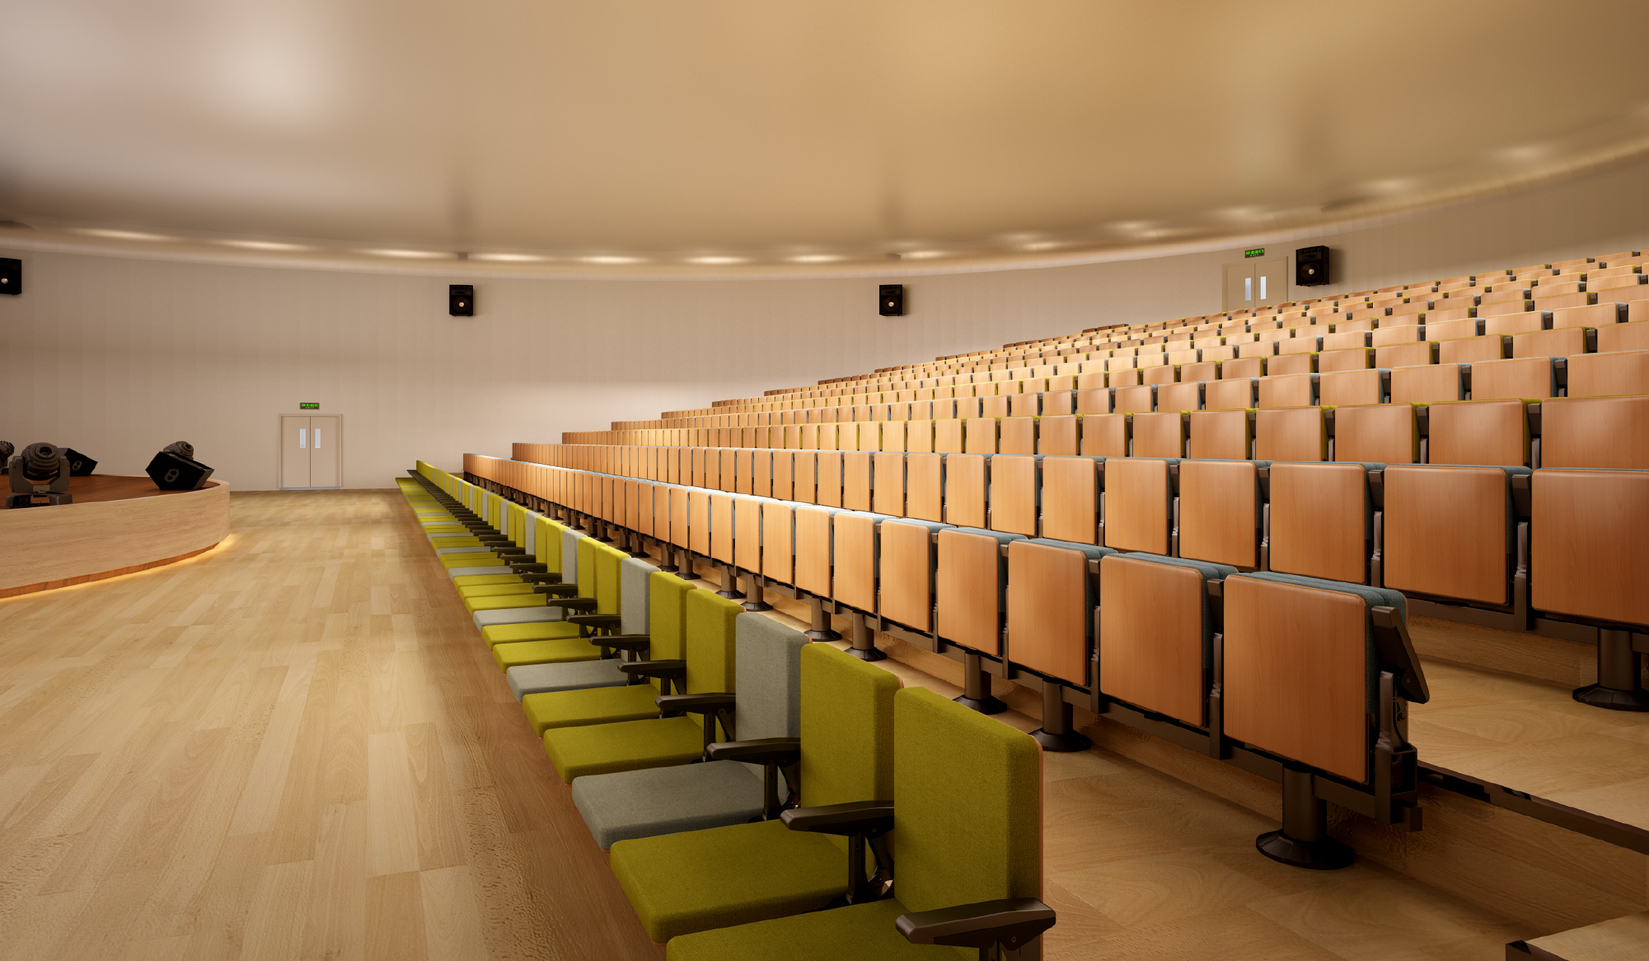 TOP 3 Reasons to Invest in Professional Auditorium Seating